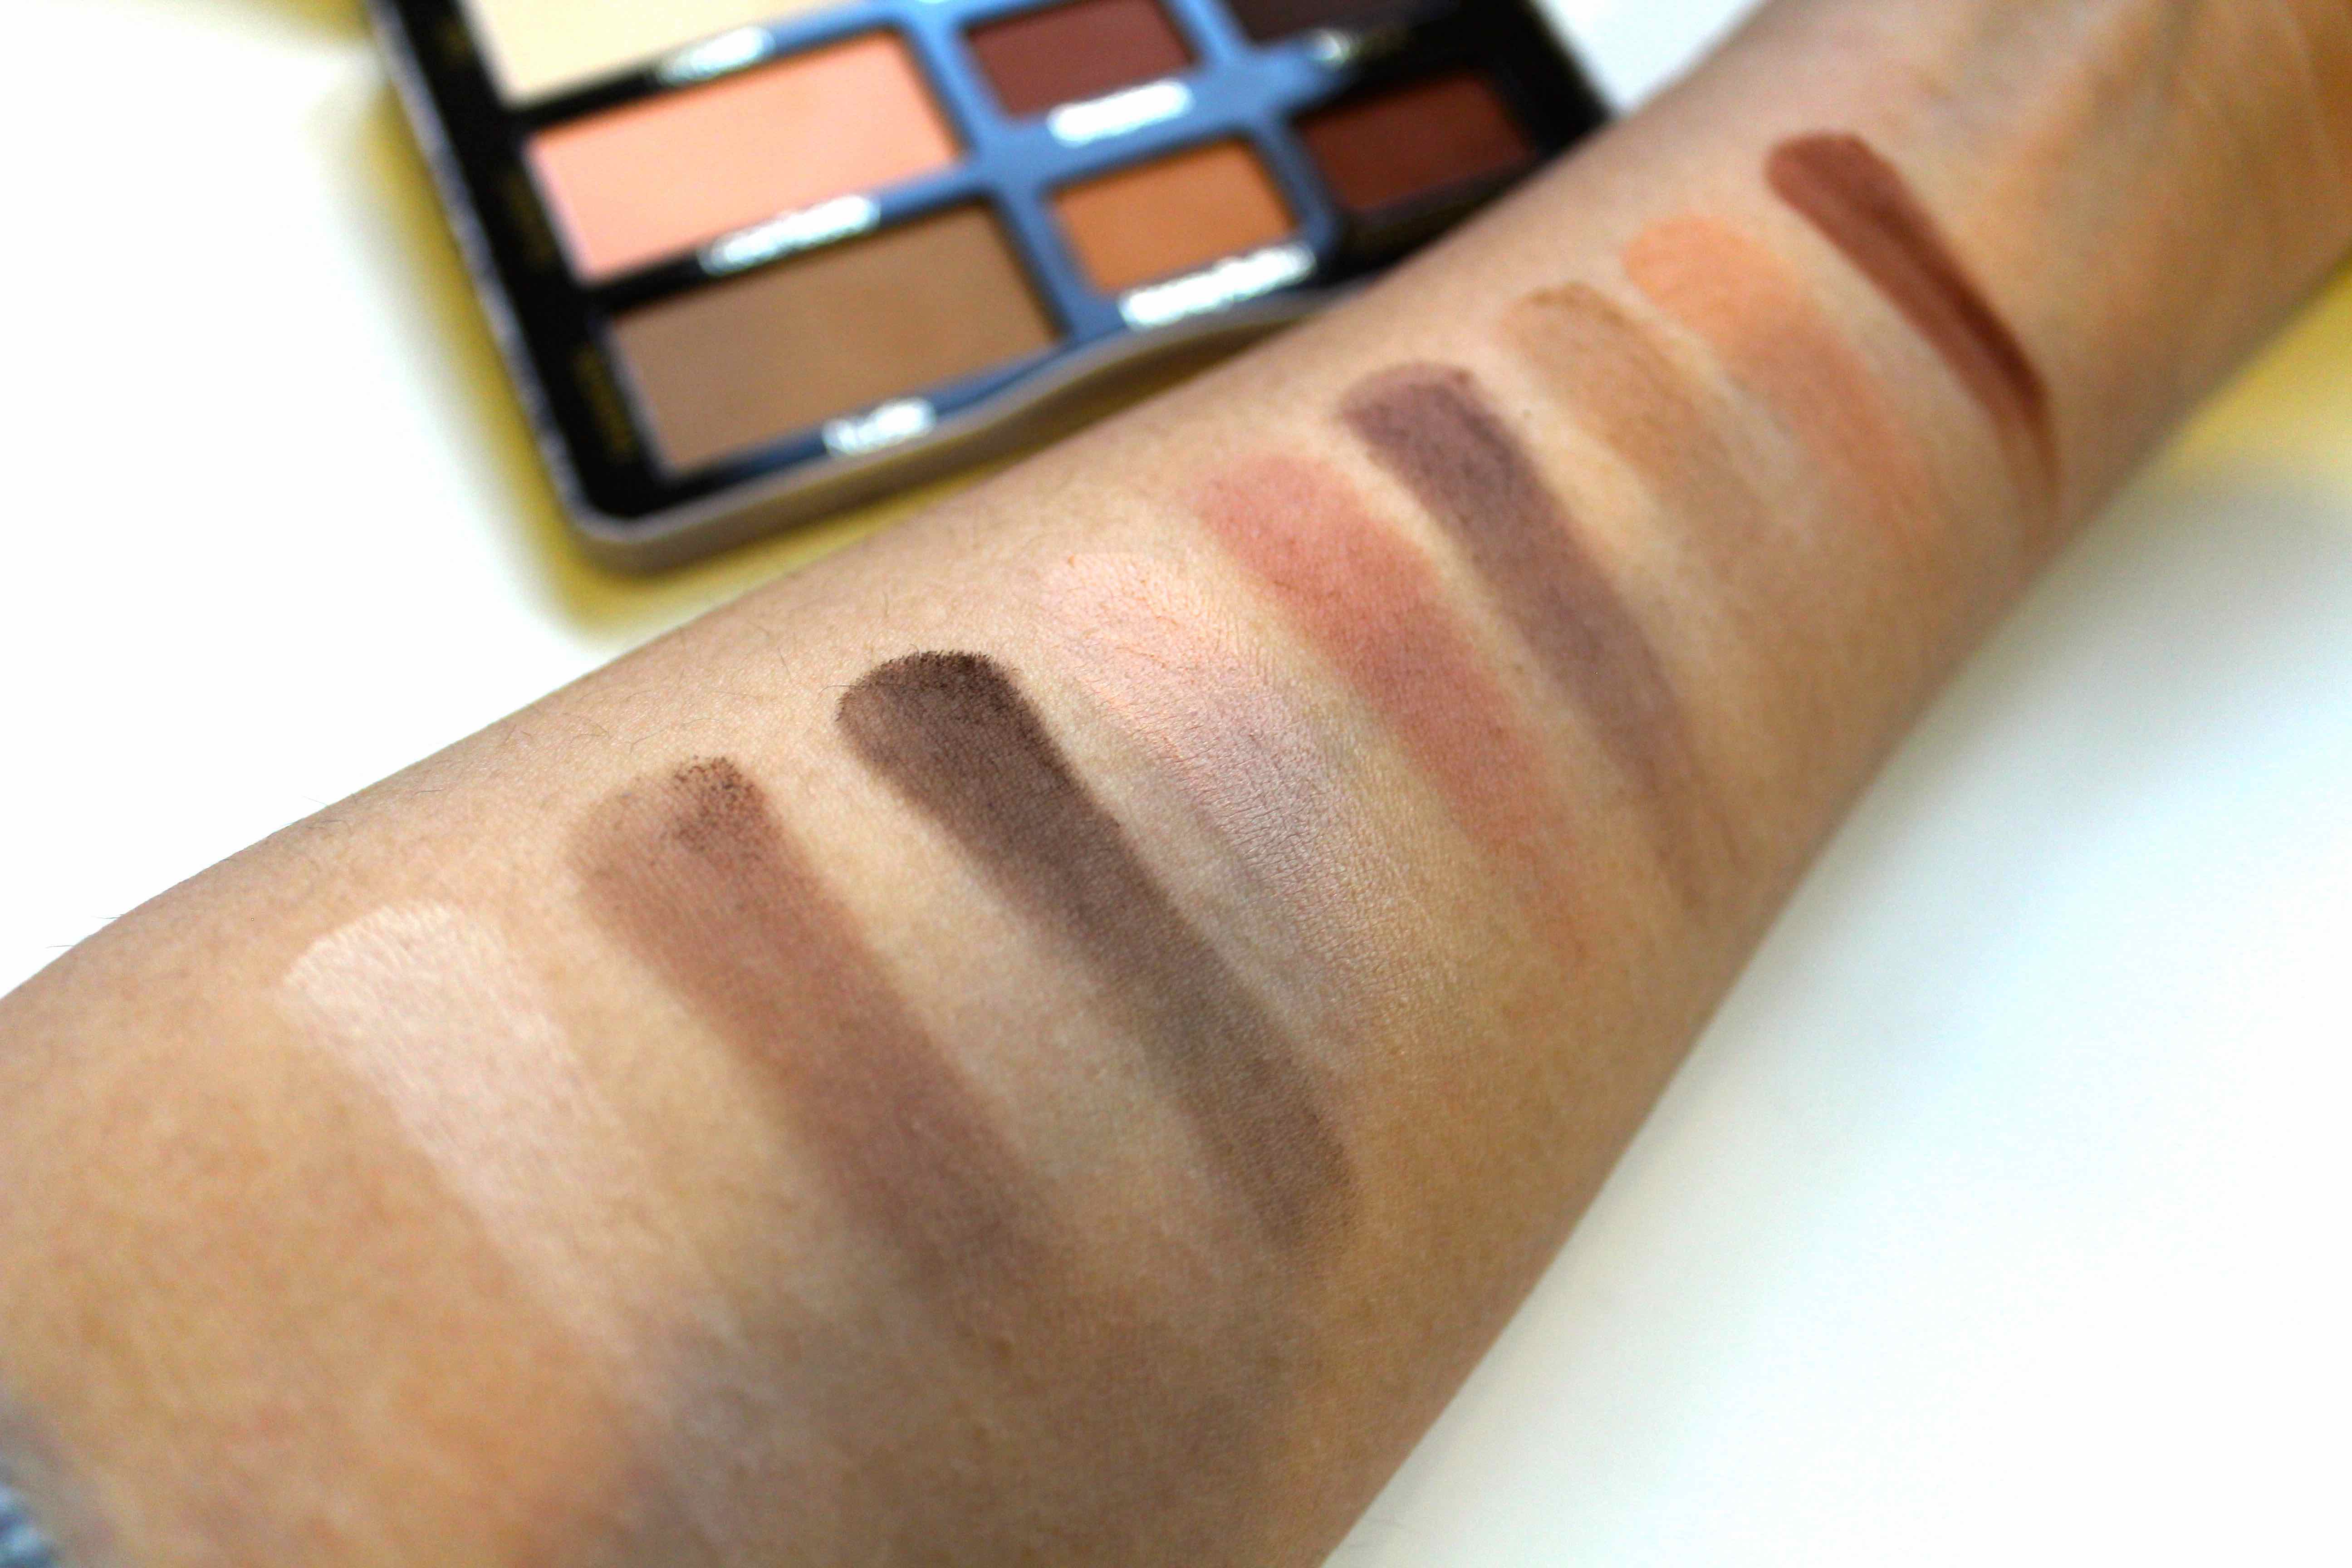 Too Faced Natural Matte Eyeshadow Swatches on arm by Face Made Up